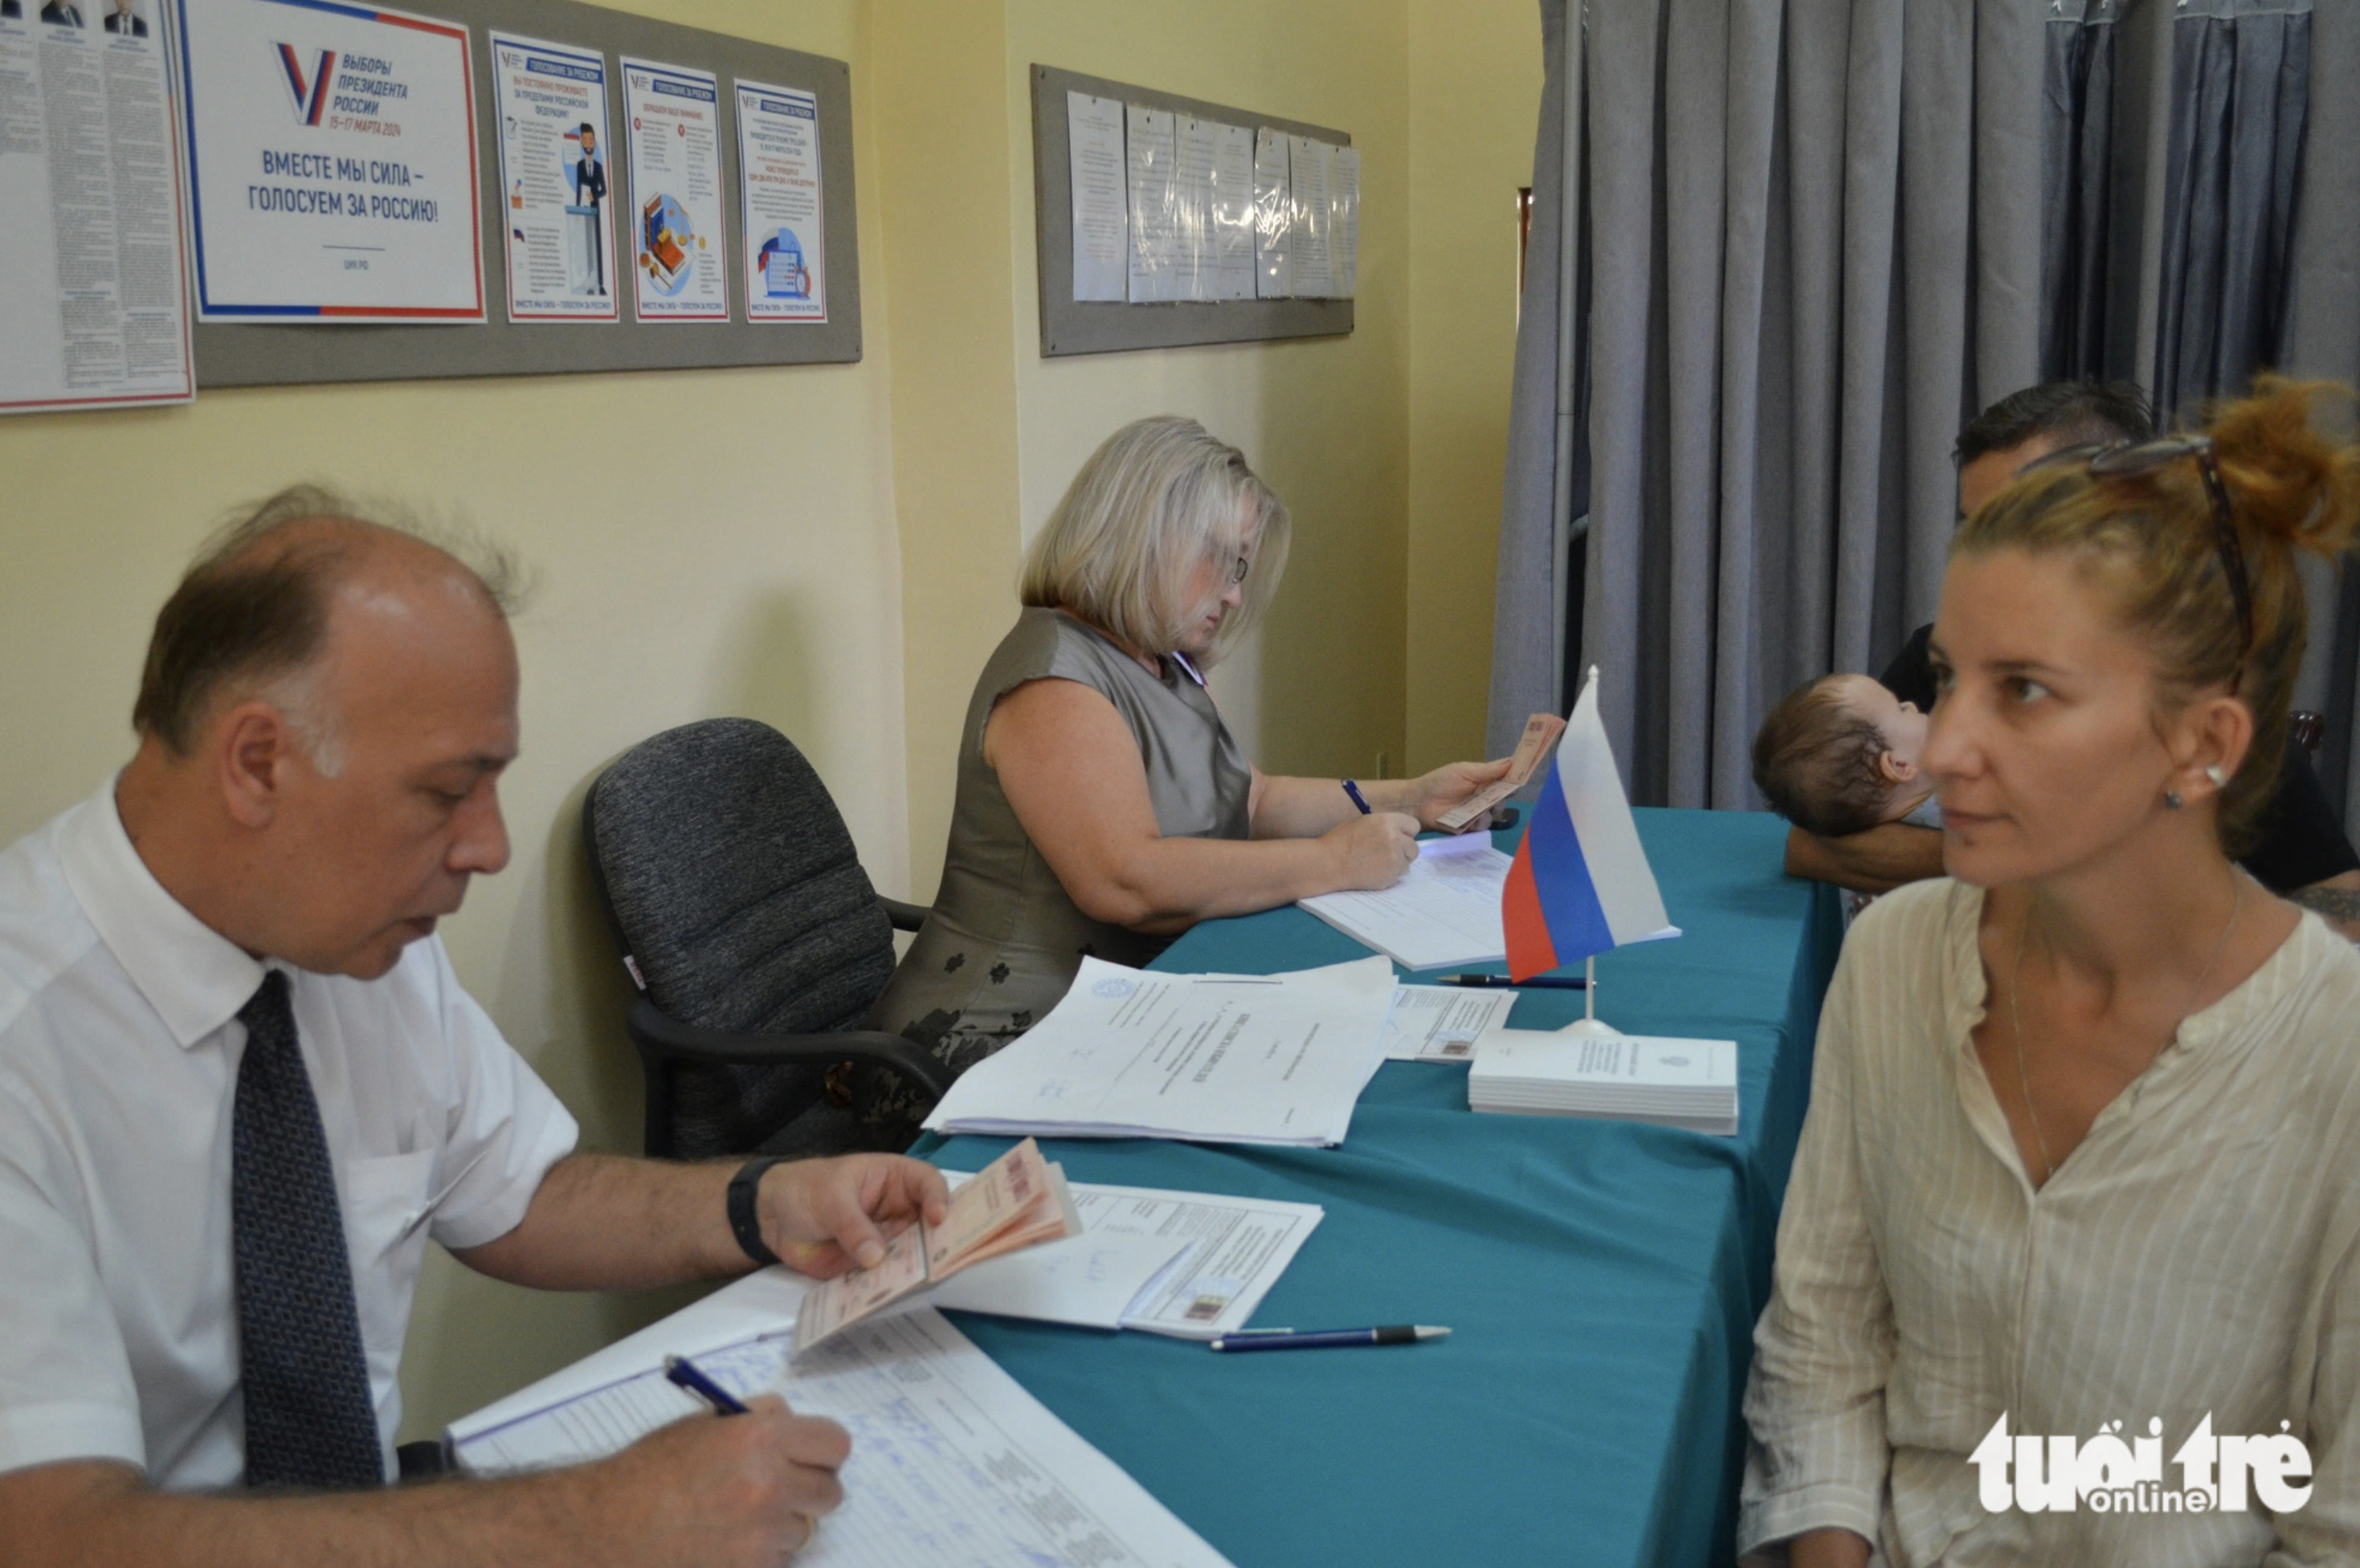 Elena (R) and her husband are pictured at a polling room at the Consulate General of Russia in Ho Chi Minh City. Photo: Uyen Phuong / Tuoi Tre